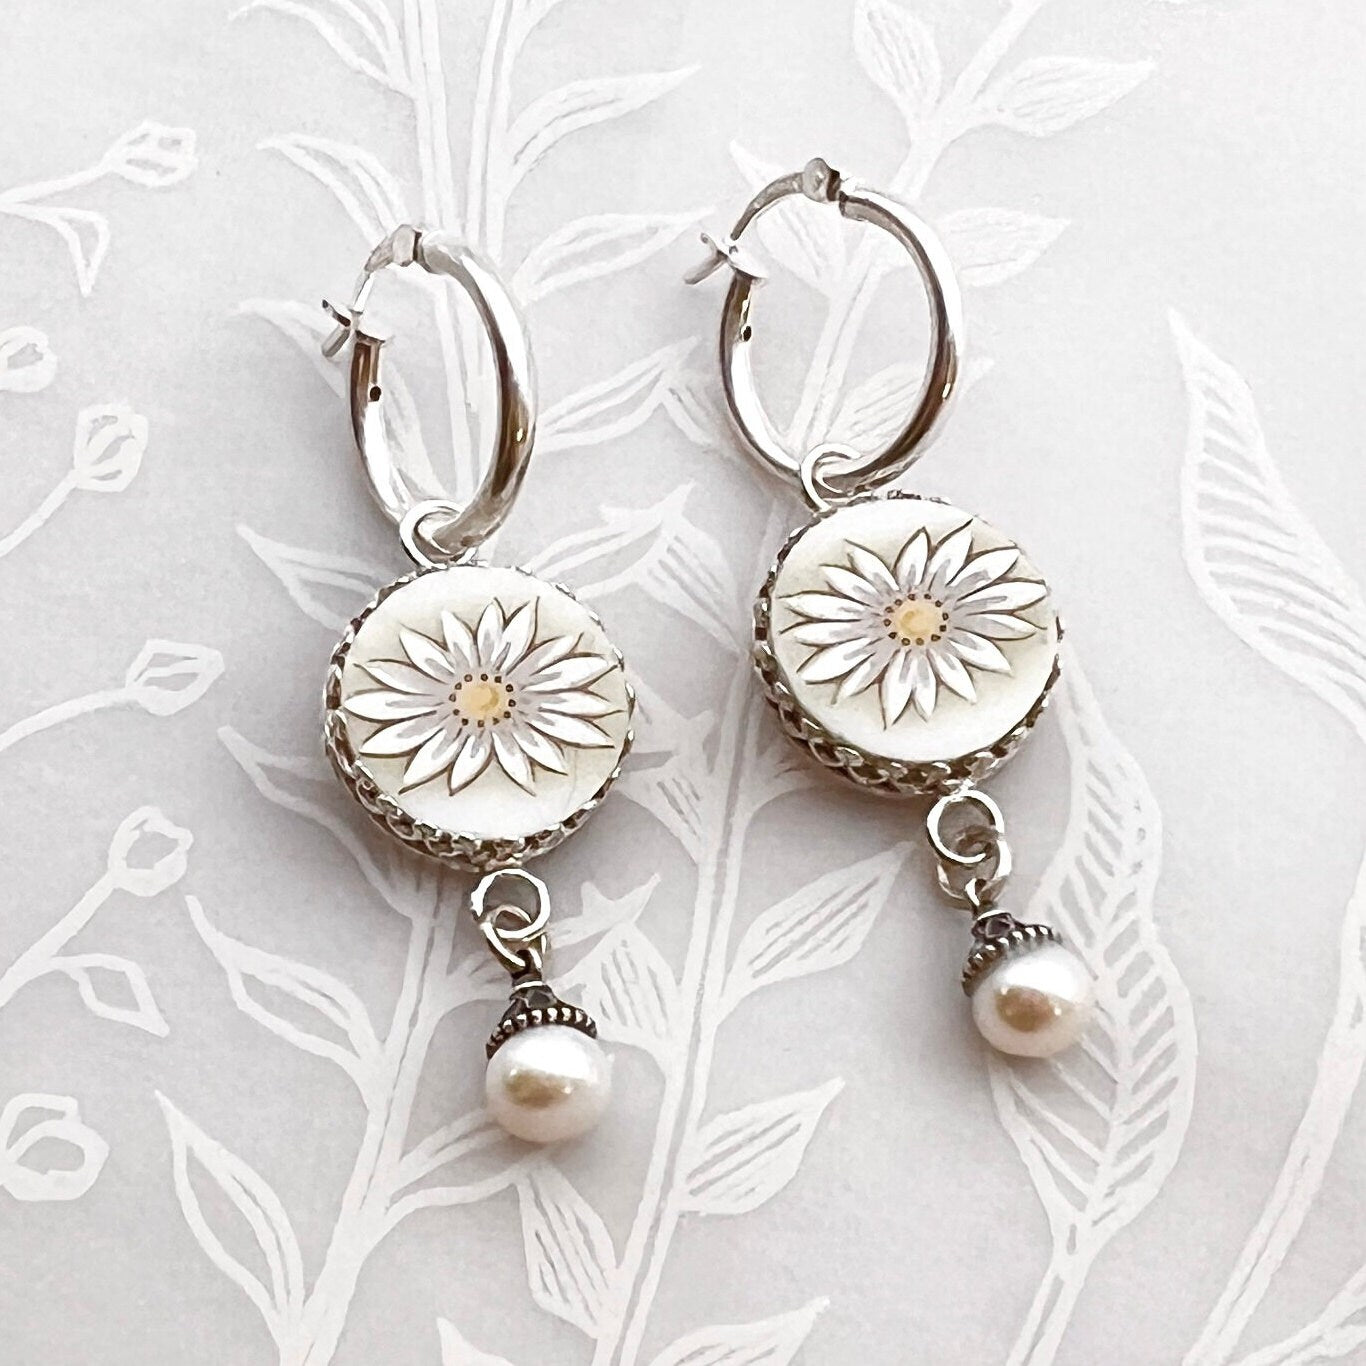 Daisy Sterling Silver Hoop Earrings, Unique 20th Anniversary Gift for Wife, Broken China Jewelry, Pearl Drop Earrings, Gifts for Women